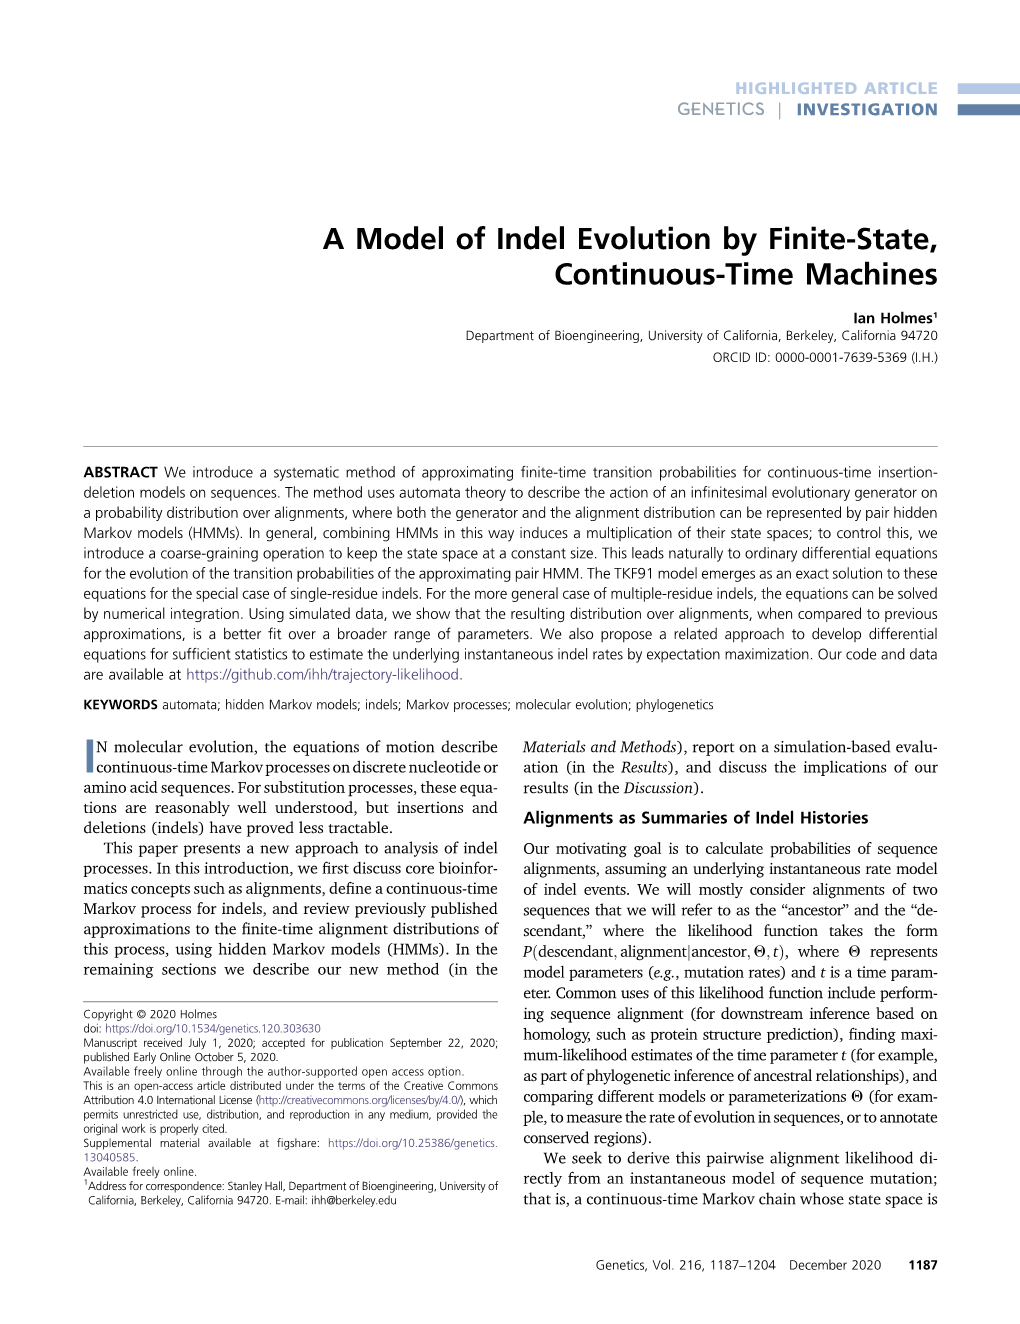 A Model of Indel Evolution by Finite-State, Continuous-Time Machines